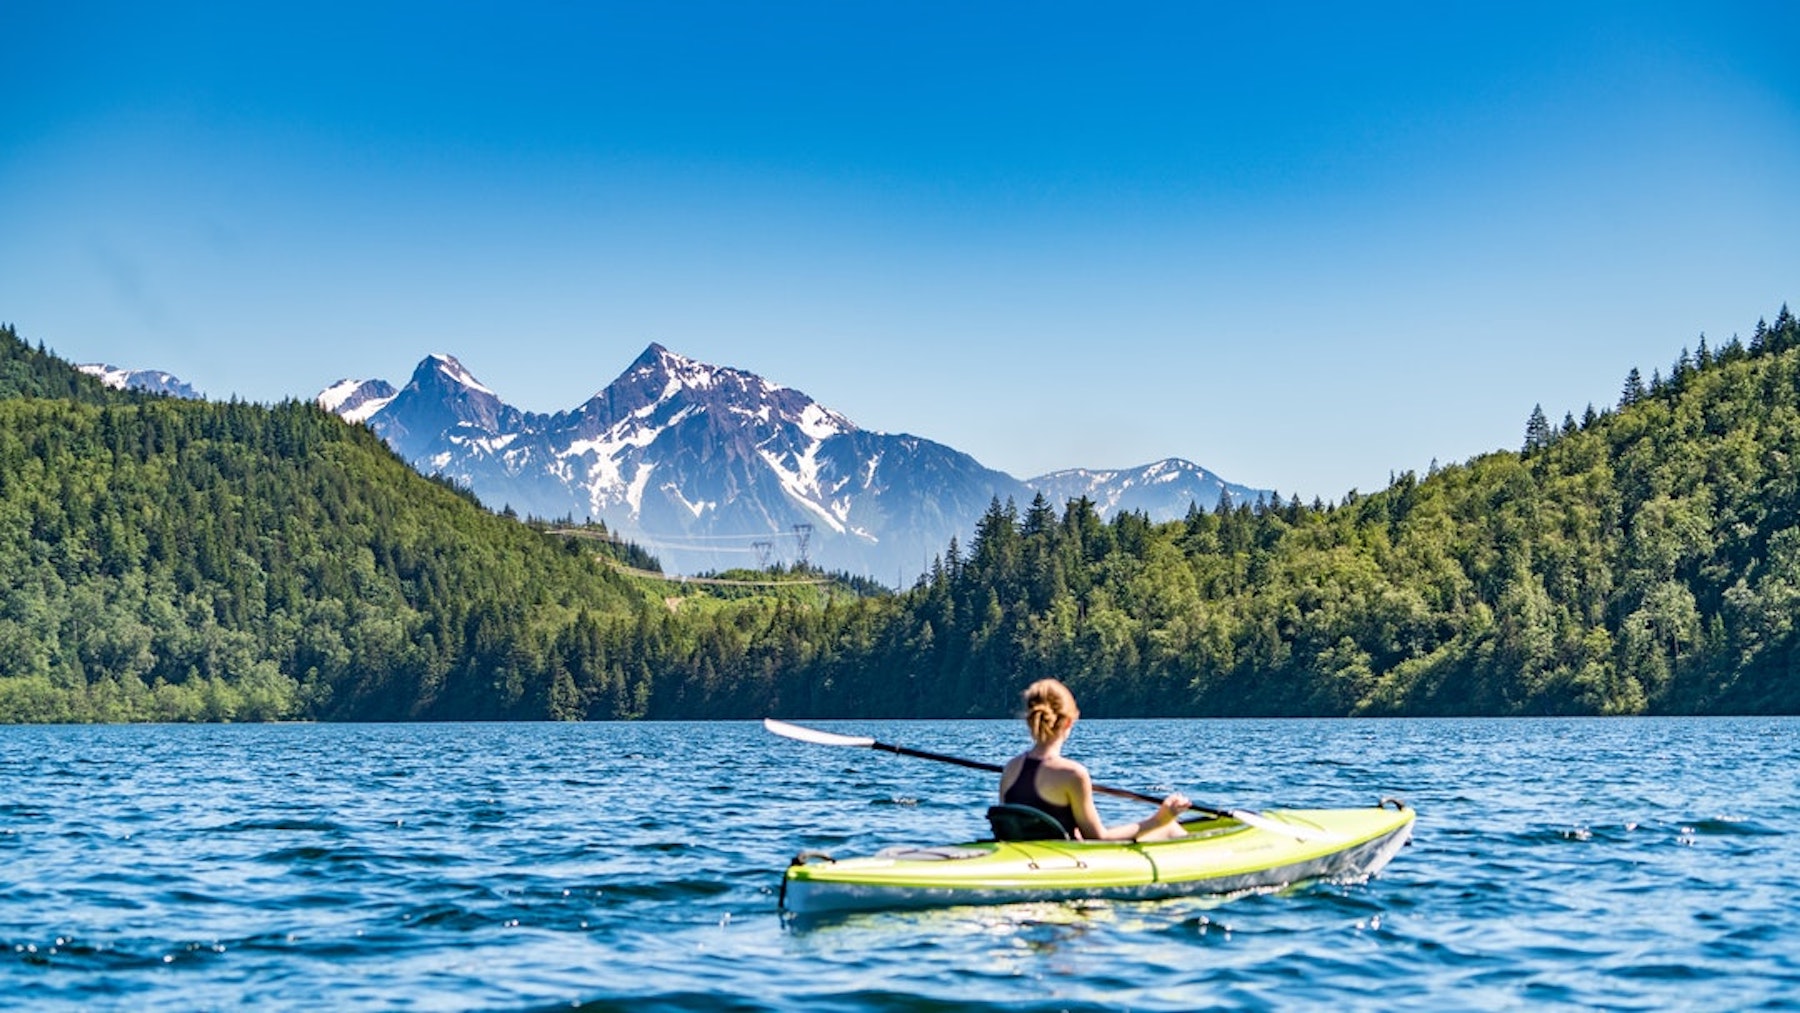 A woman paddles her fishing kayak across the clear blue water. A large mountain is in the background with forestry covering large side hills.